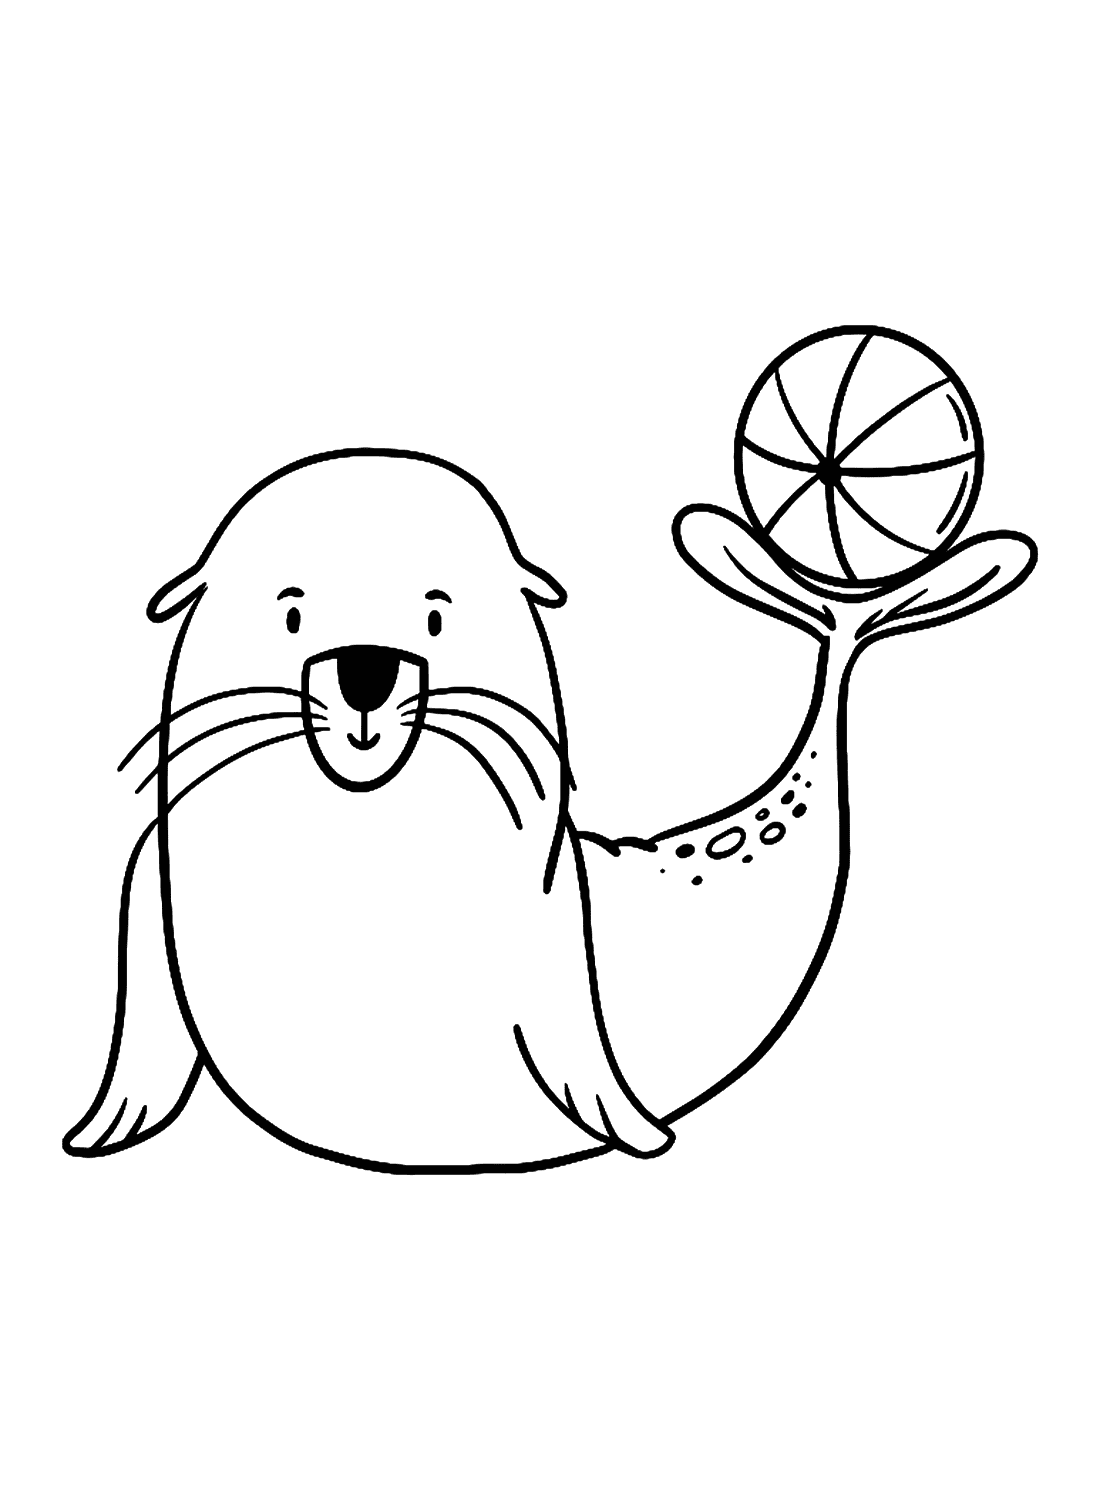 Cartoon Sea Lion Playing With A Ball from Sea Lion